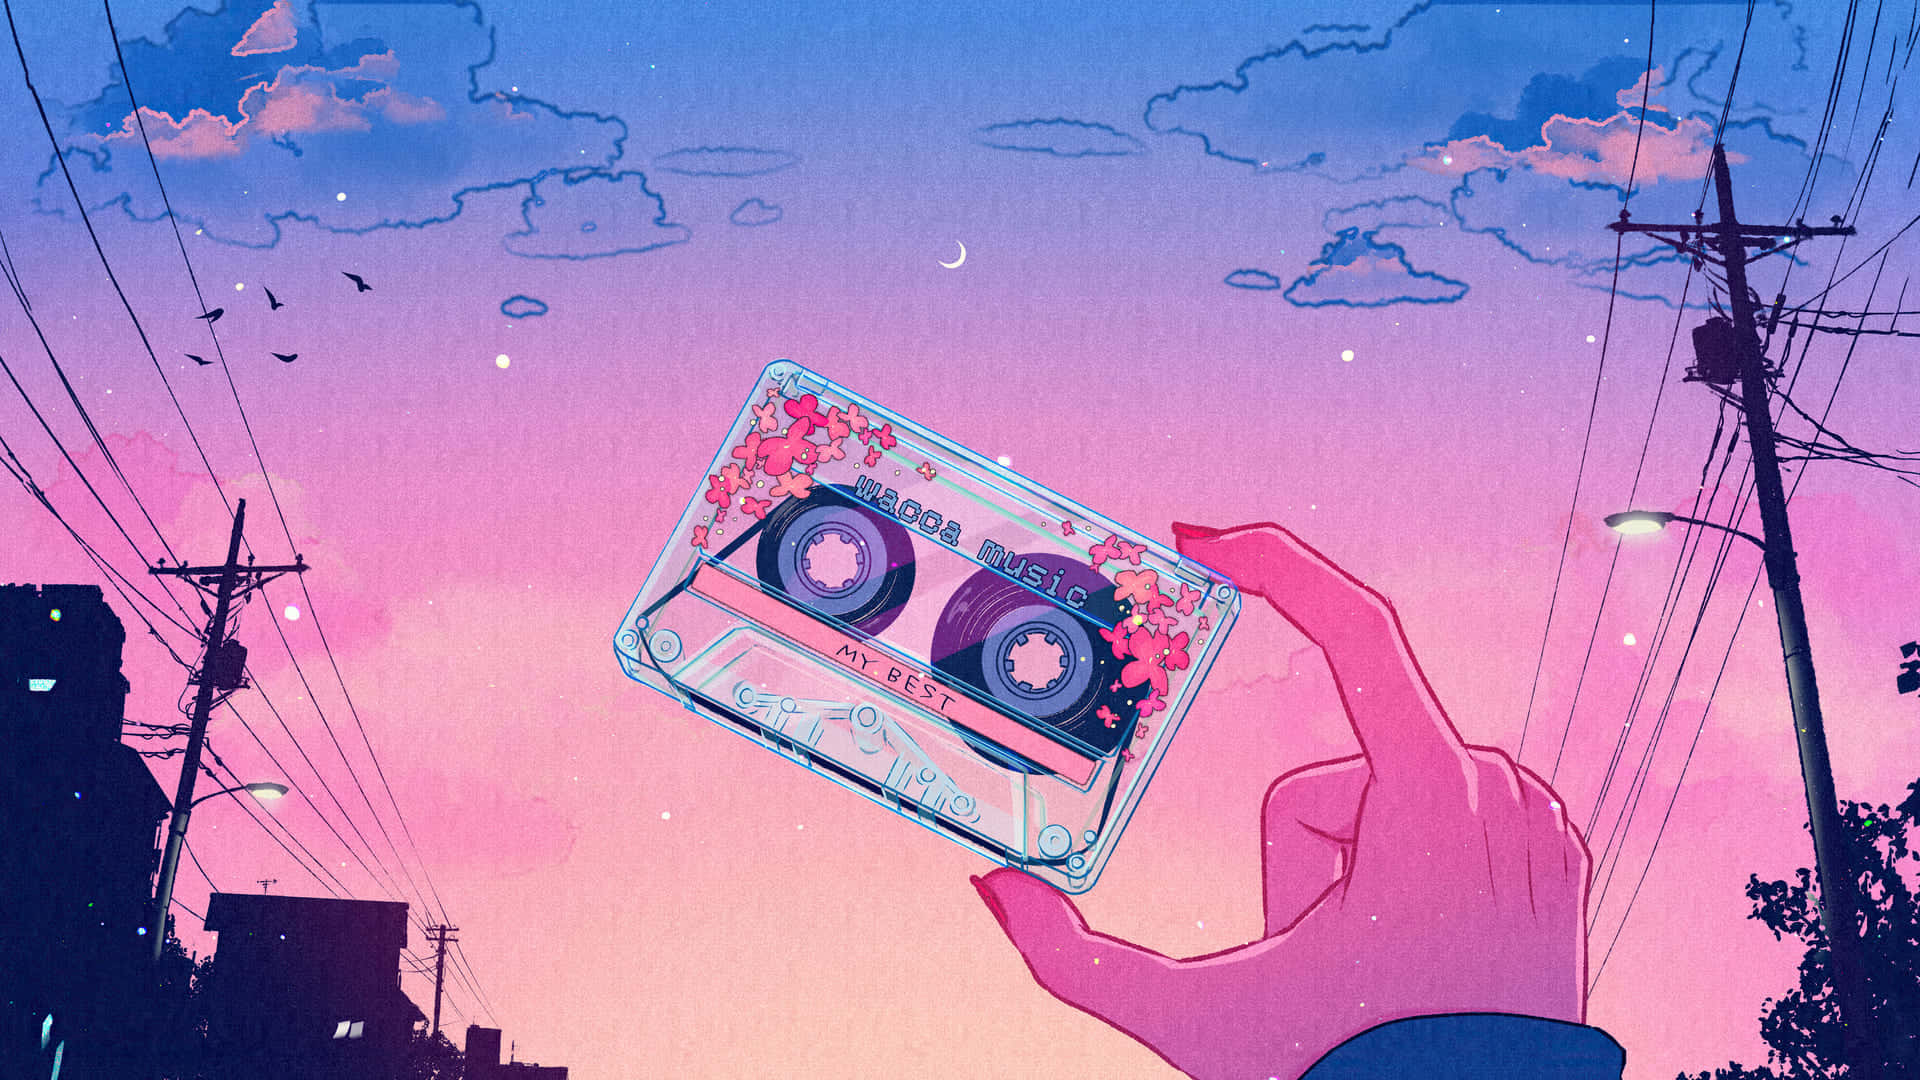 "Discover a dreamy aesthetic with Vaporwave" Wallpaper